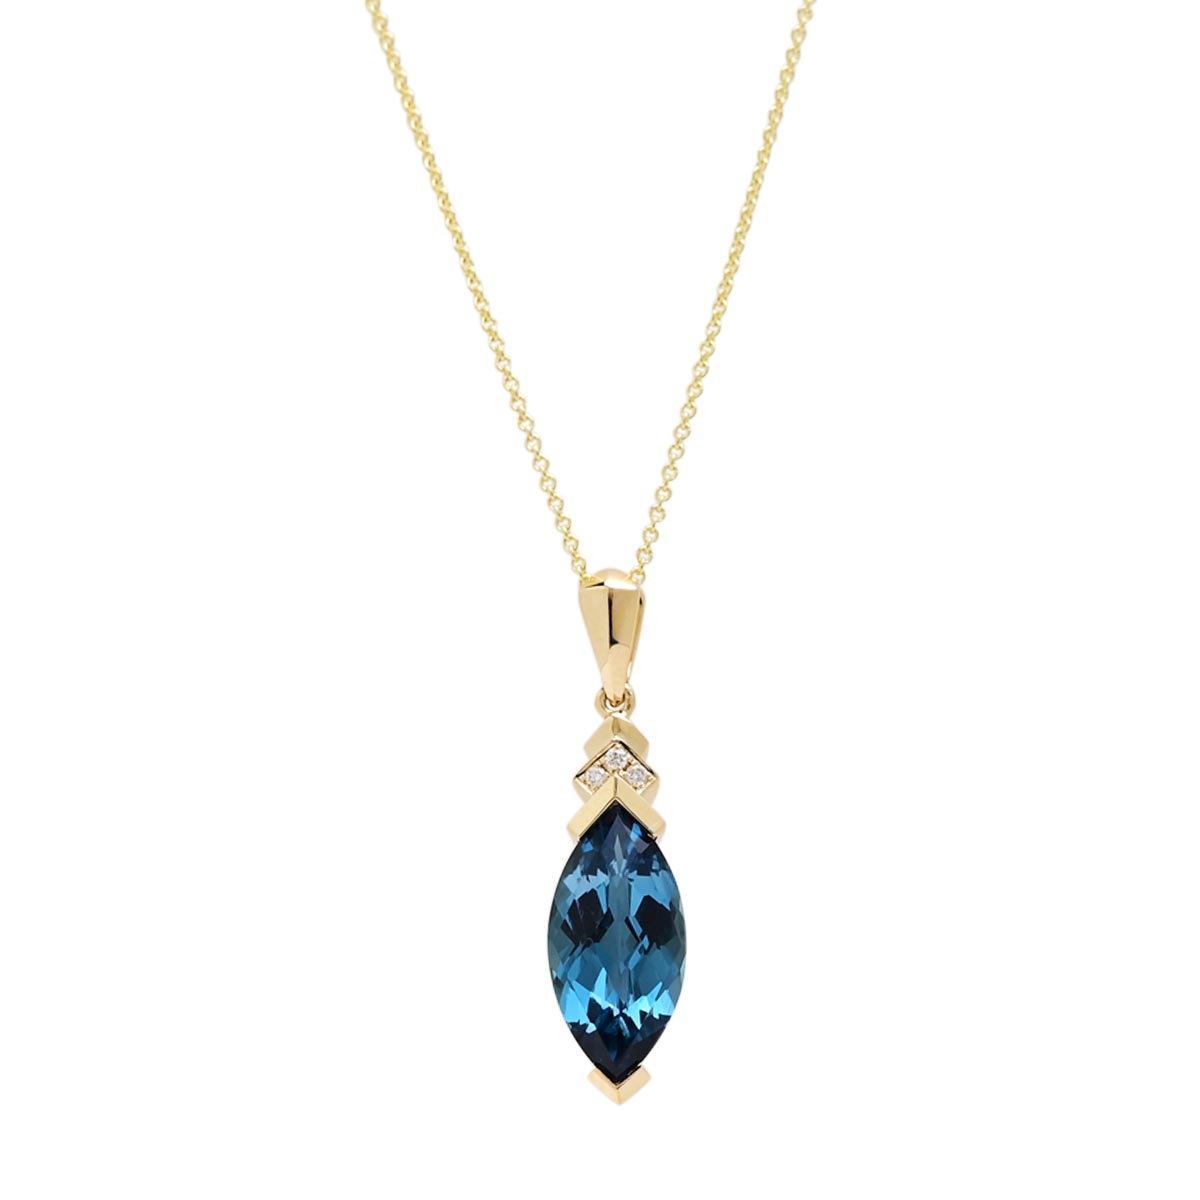 Marquise London Blue Topaz Necklace in 14kt Yellow Gold with Diamonds ...